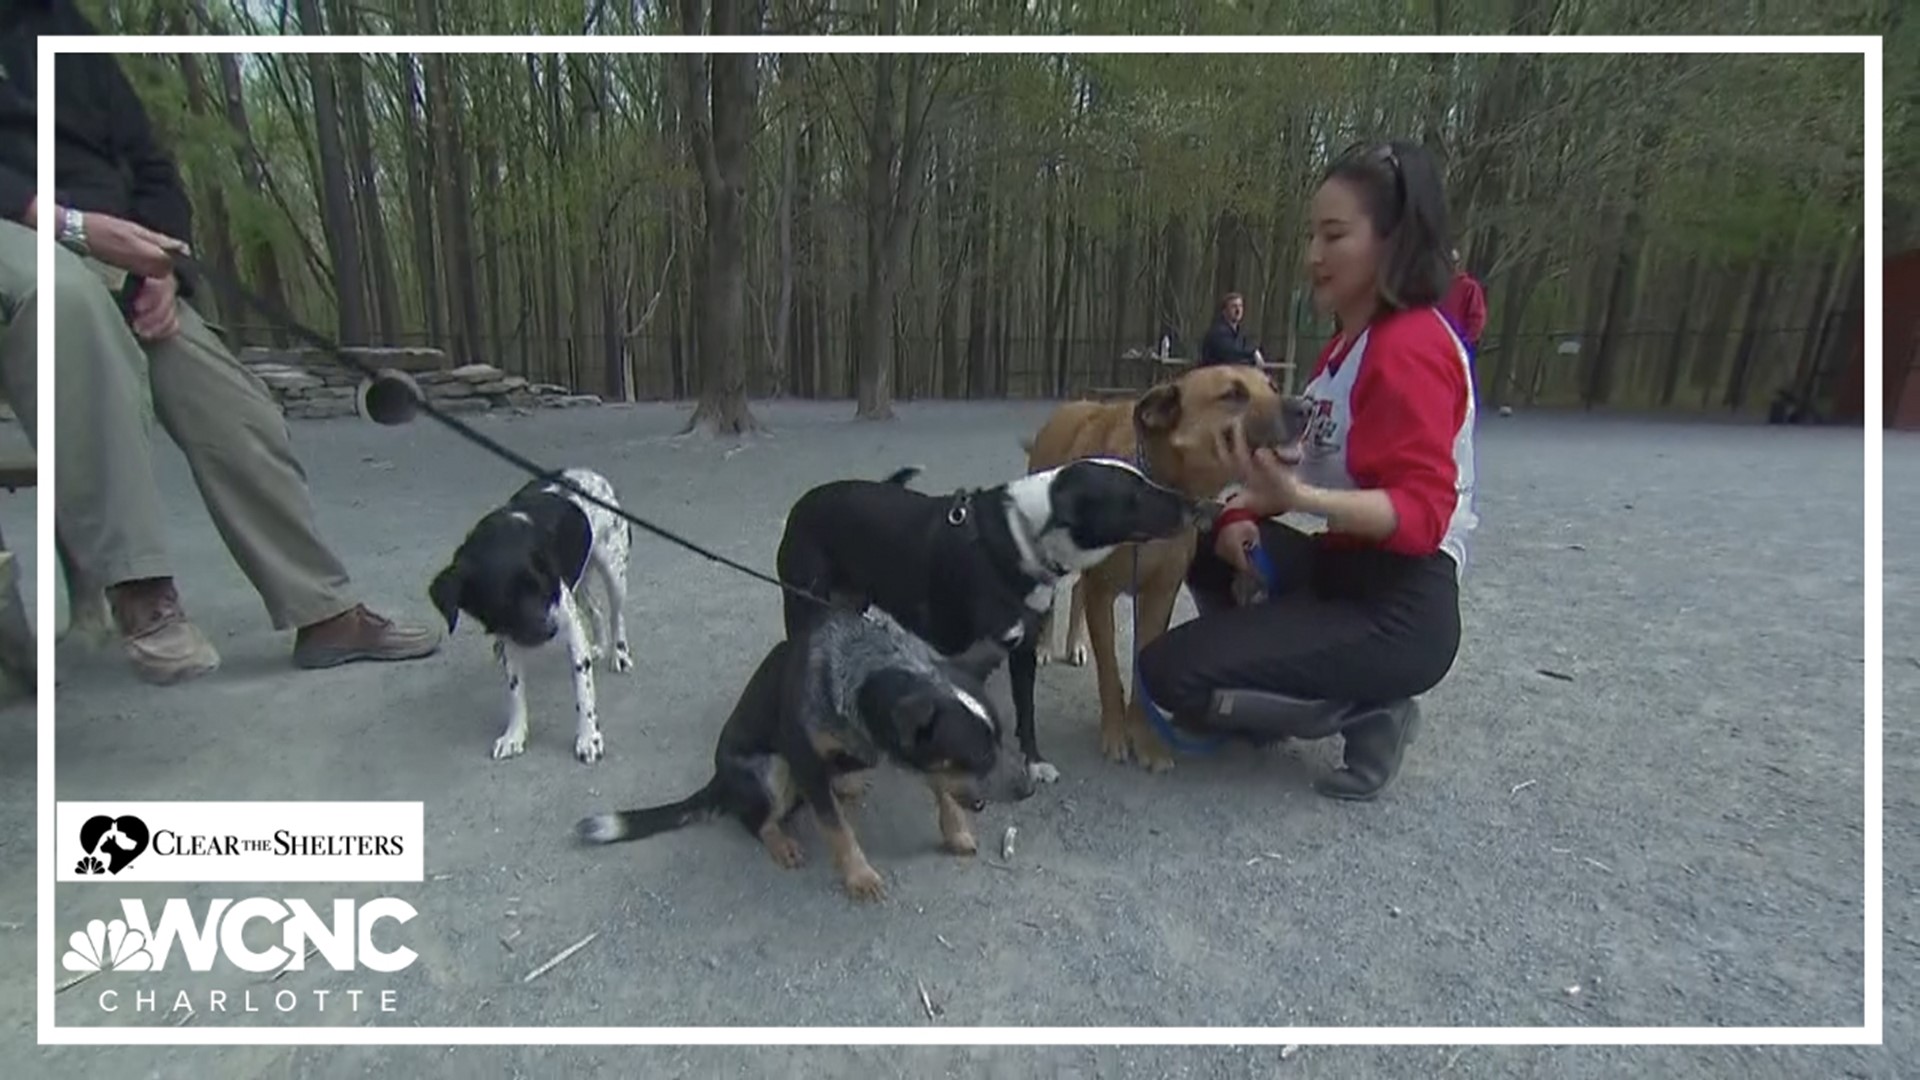 WCNC Charlotte's Brittany Van Voorhees discusses the importance of microchips in rescue animals.